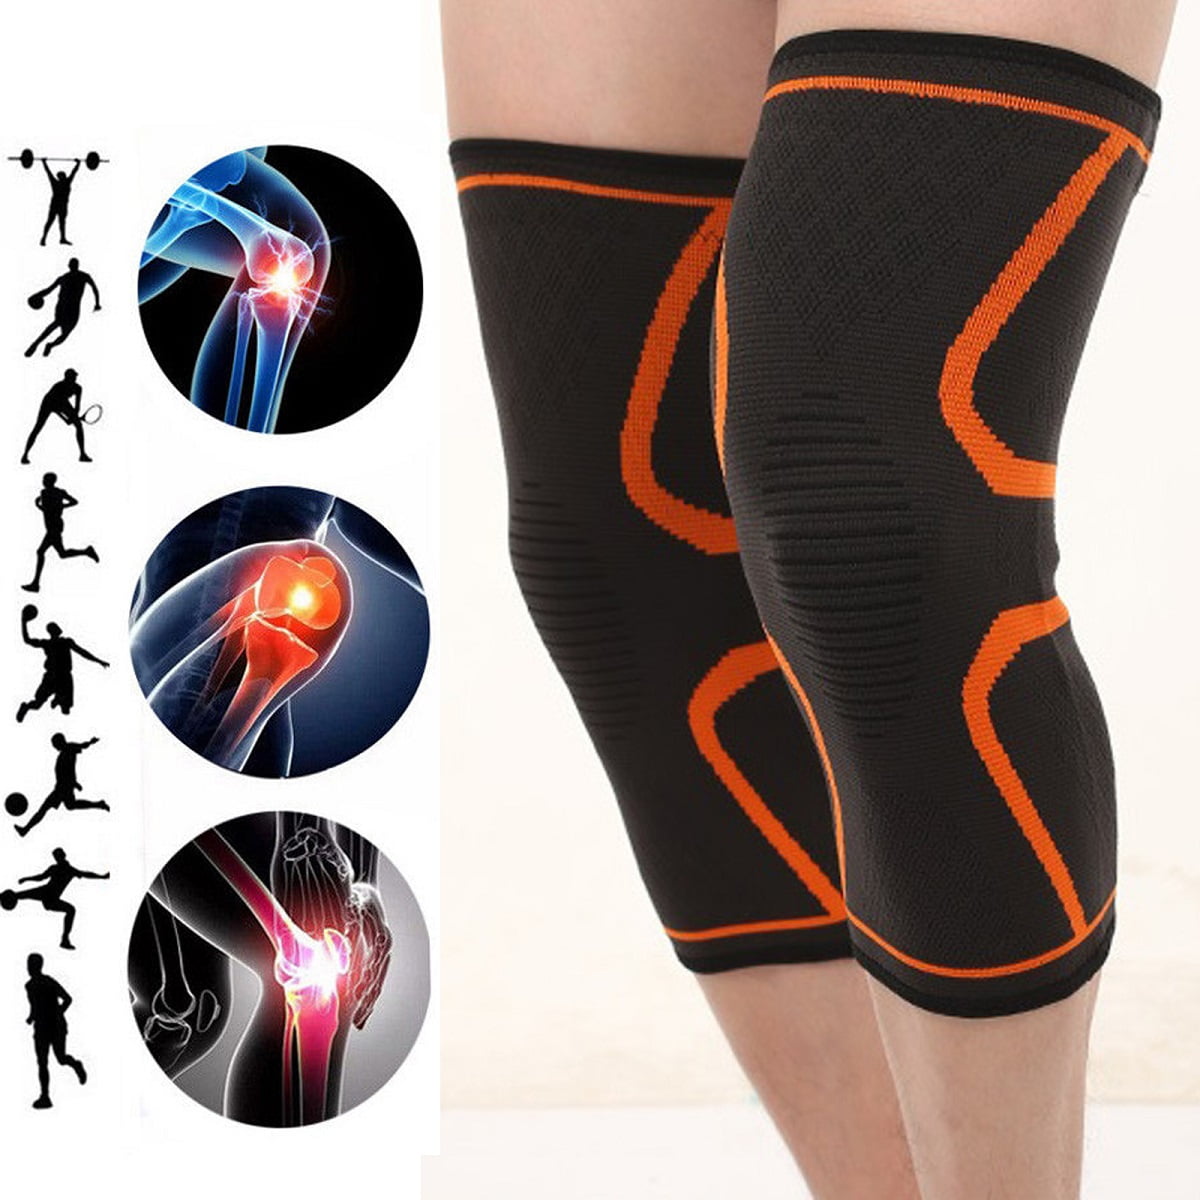 2X Knee Sleeve Compression Brace Support For Sport Joint Pain Arthritis Relief 